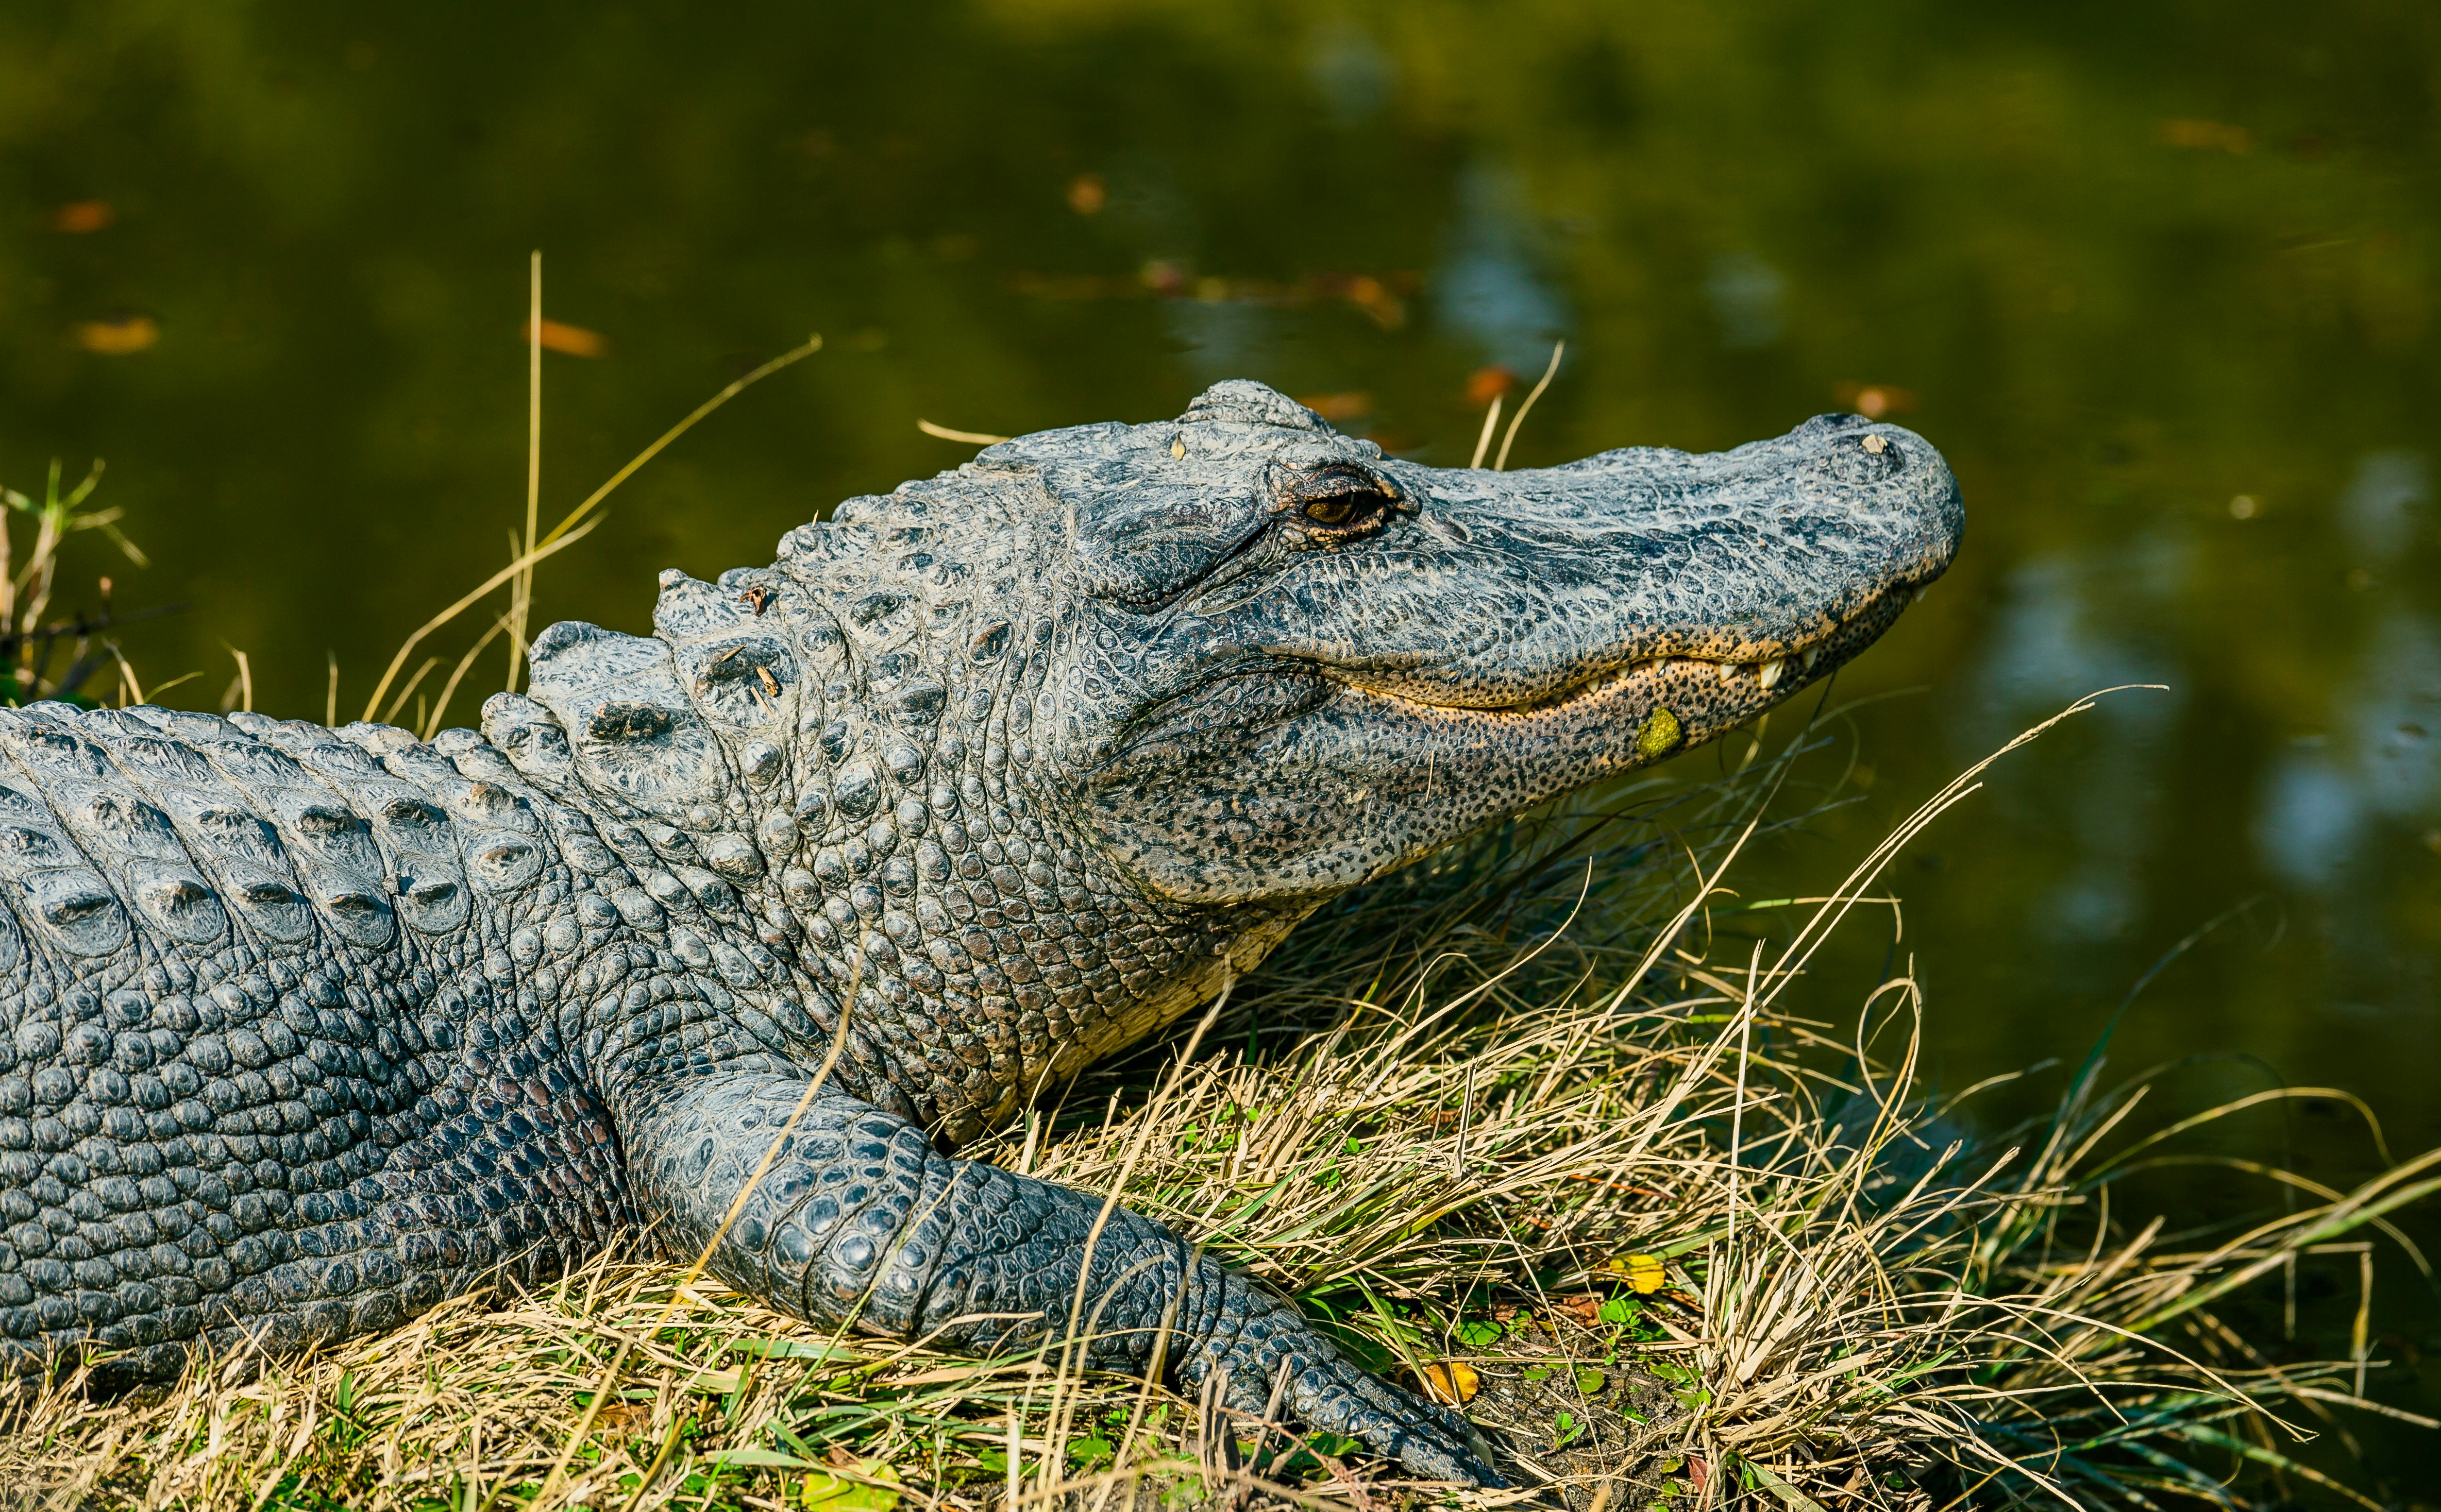 gray crocodile near body of water during daytime